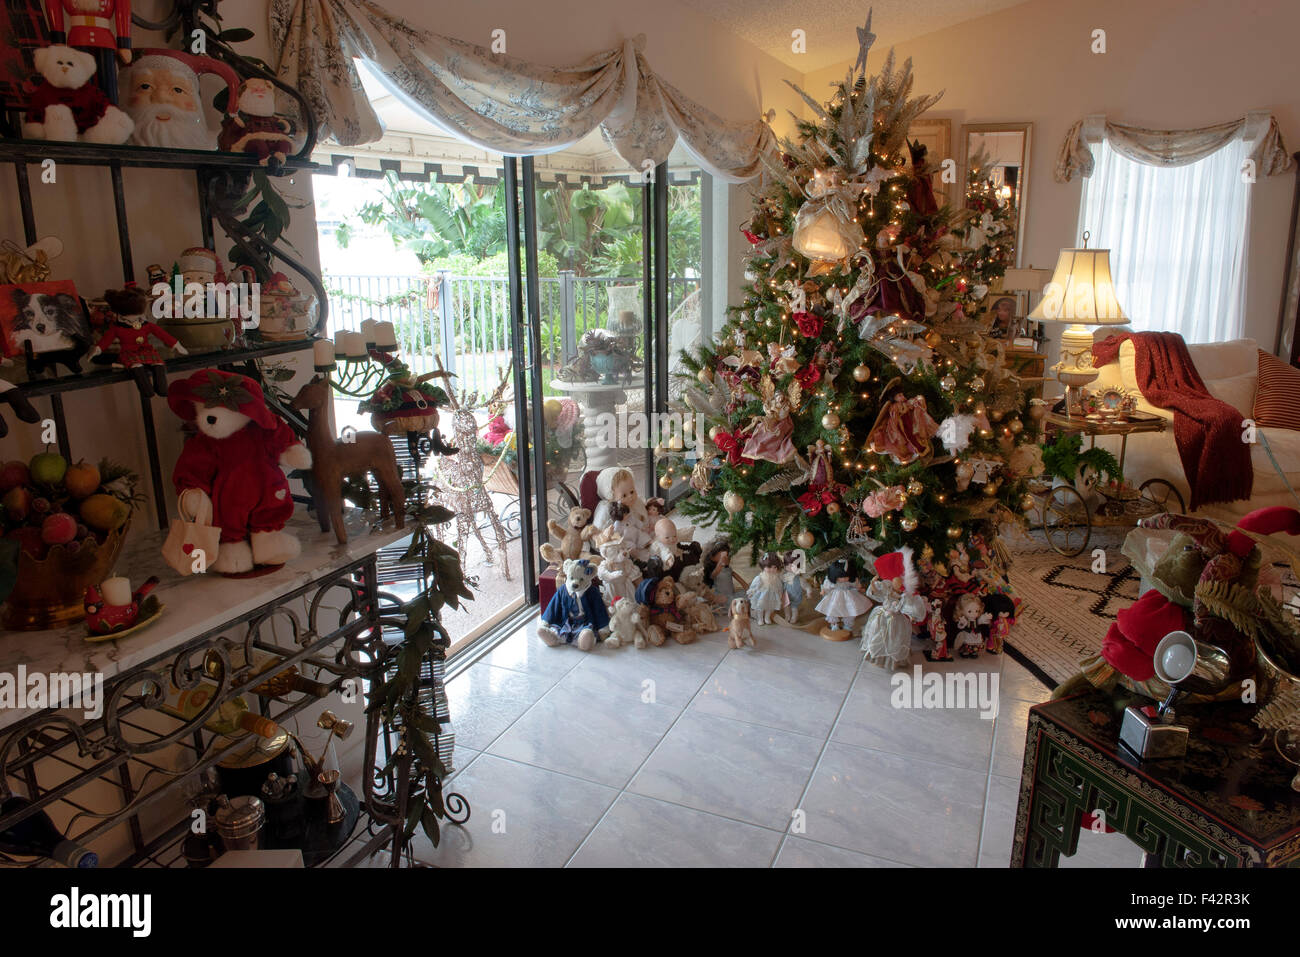 Home interior heavily decorated for Christmas Stock Photo